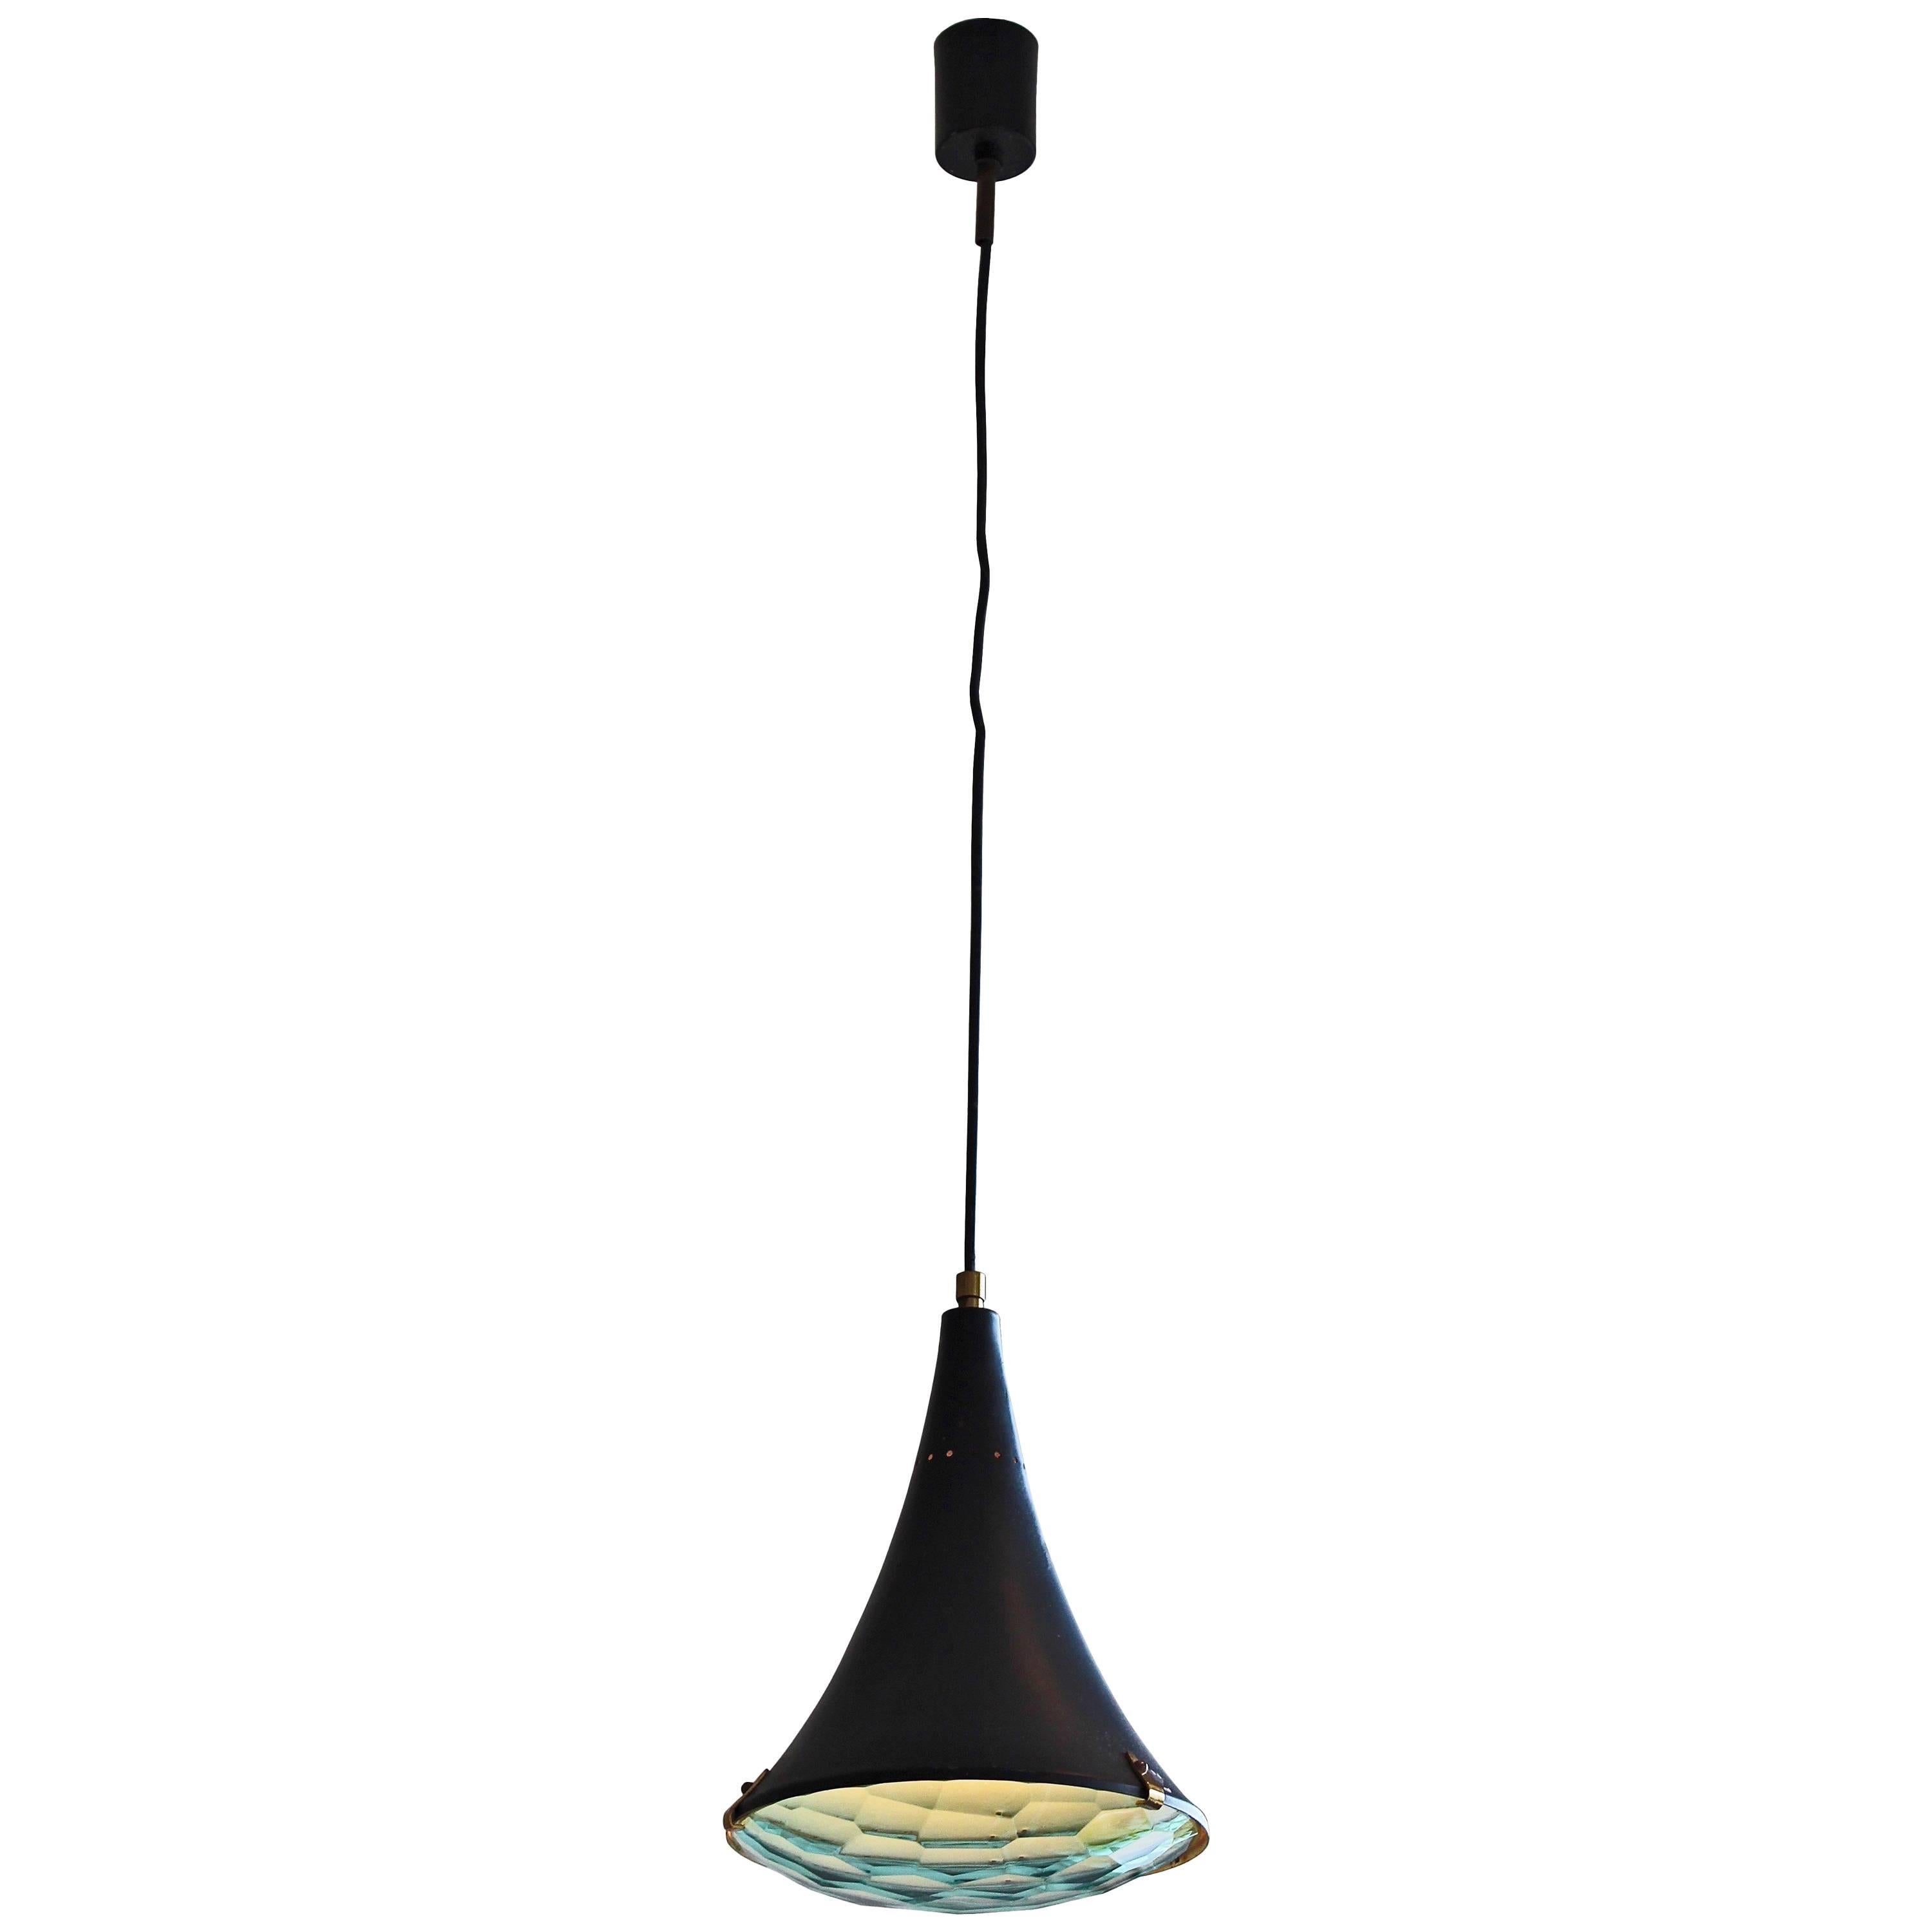 Rare faceted glass, black lacquer with brass details

Similar in design to Max Ingrand for Fontana Arte pendant...

Drop from ceiling to suit...